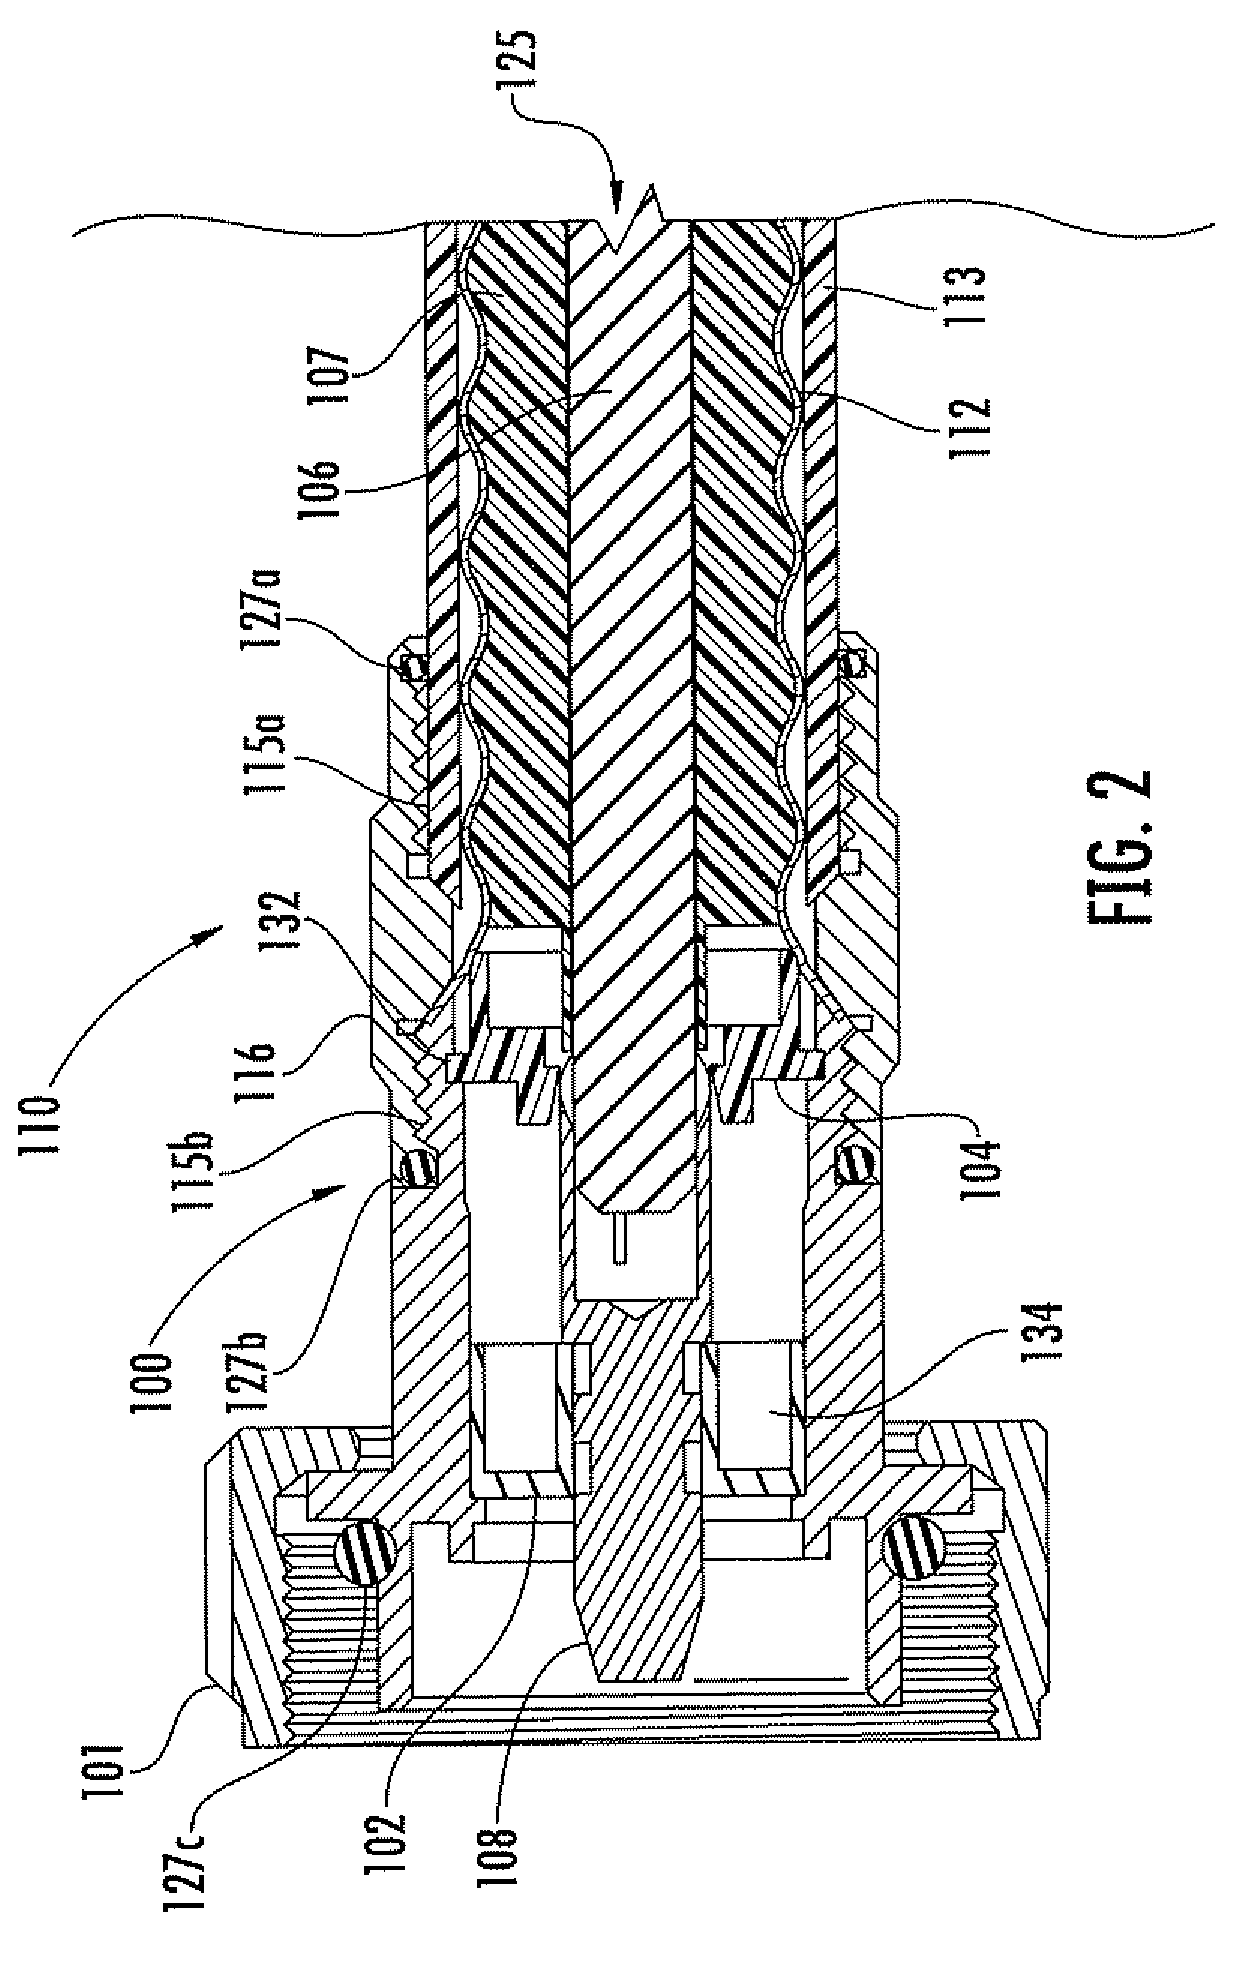 Method for making coaxial cable connector components for multiple configurations and related devices